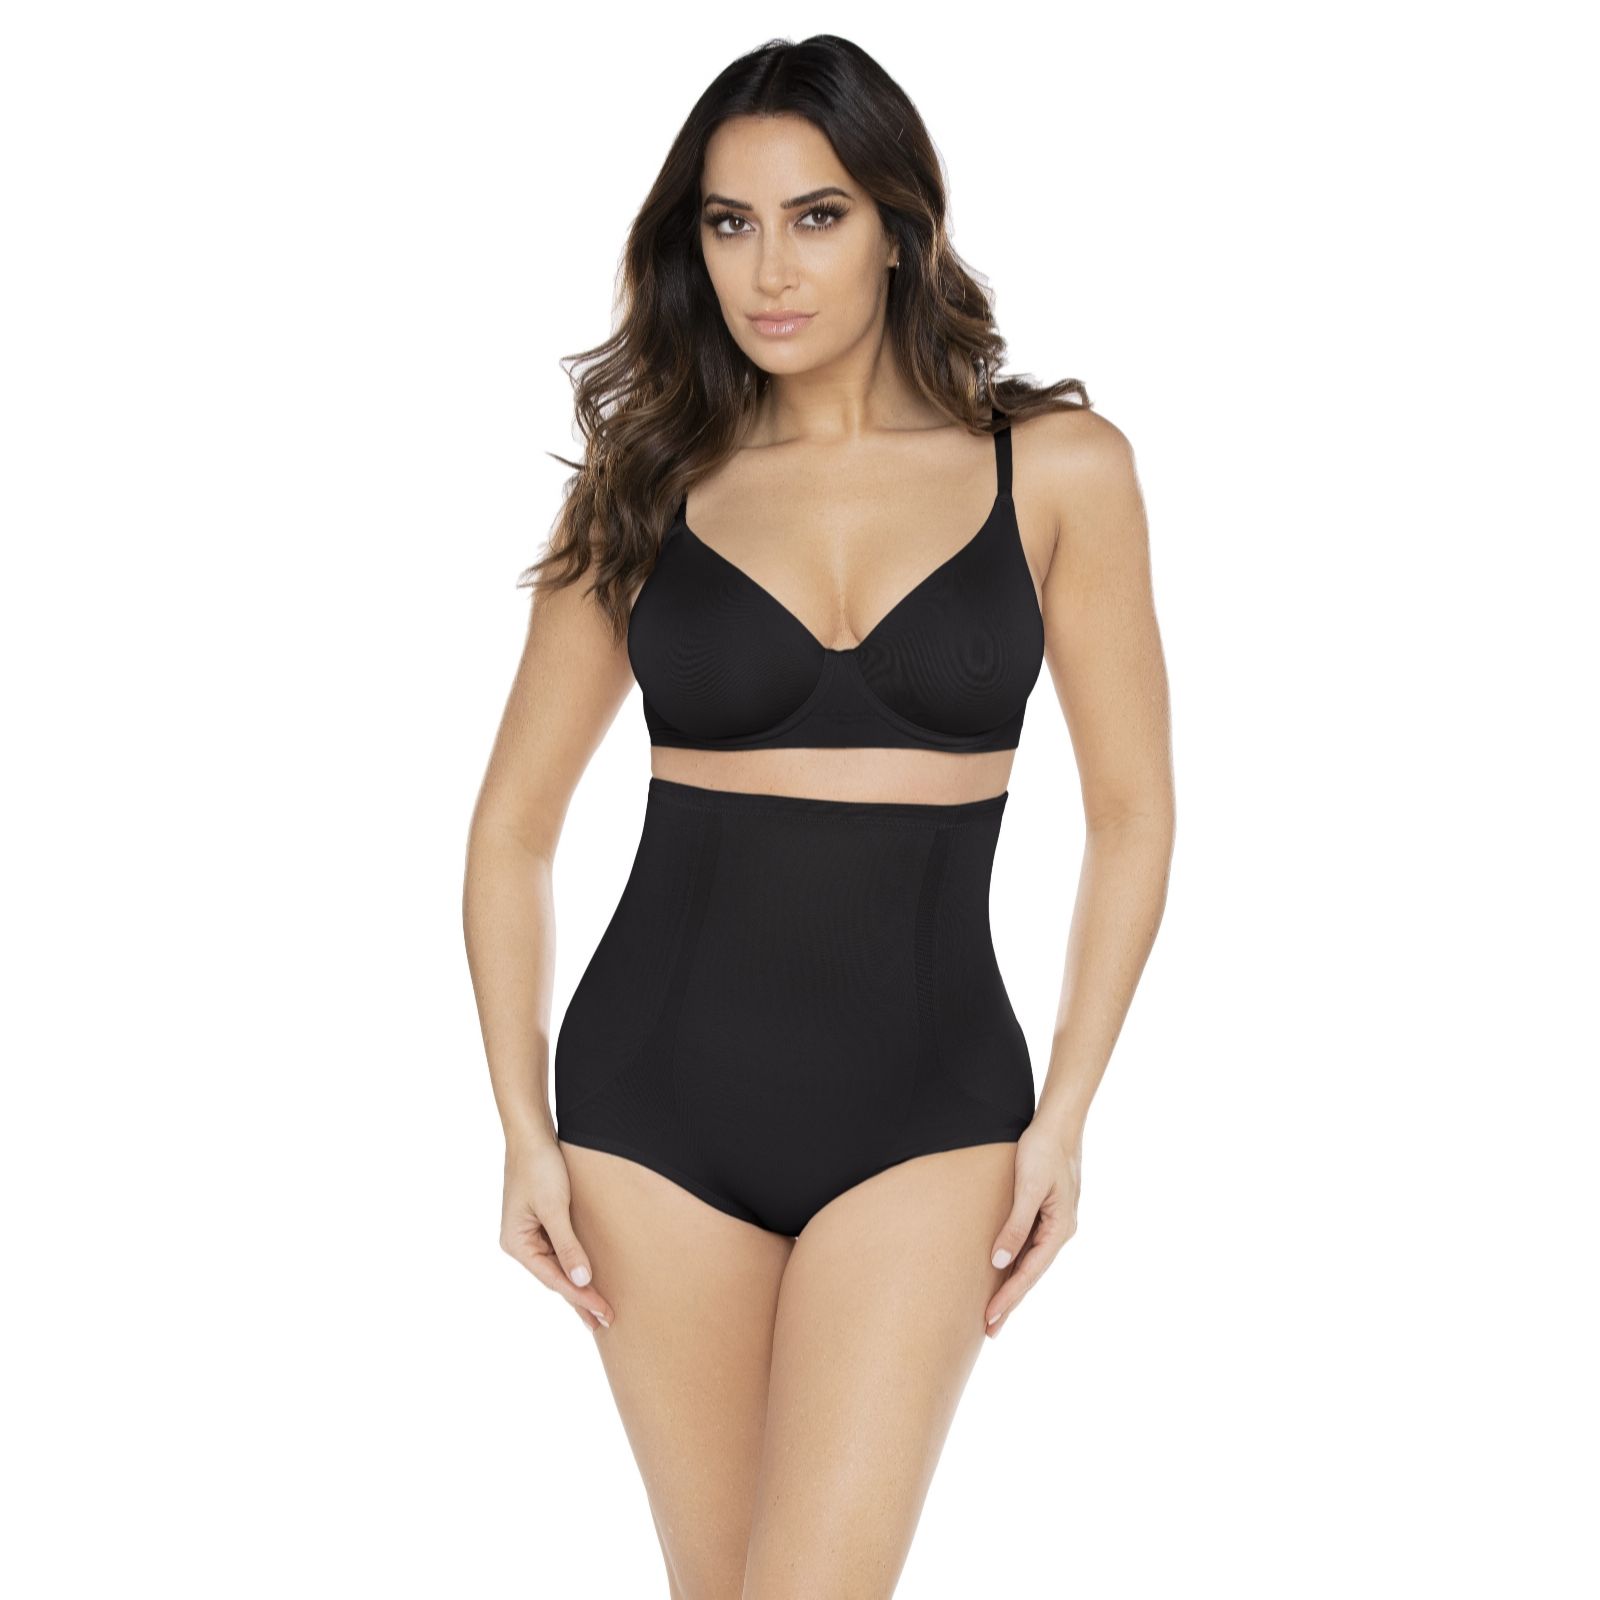 Miraclesuit High Waist Brief - Black and Cocoa